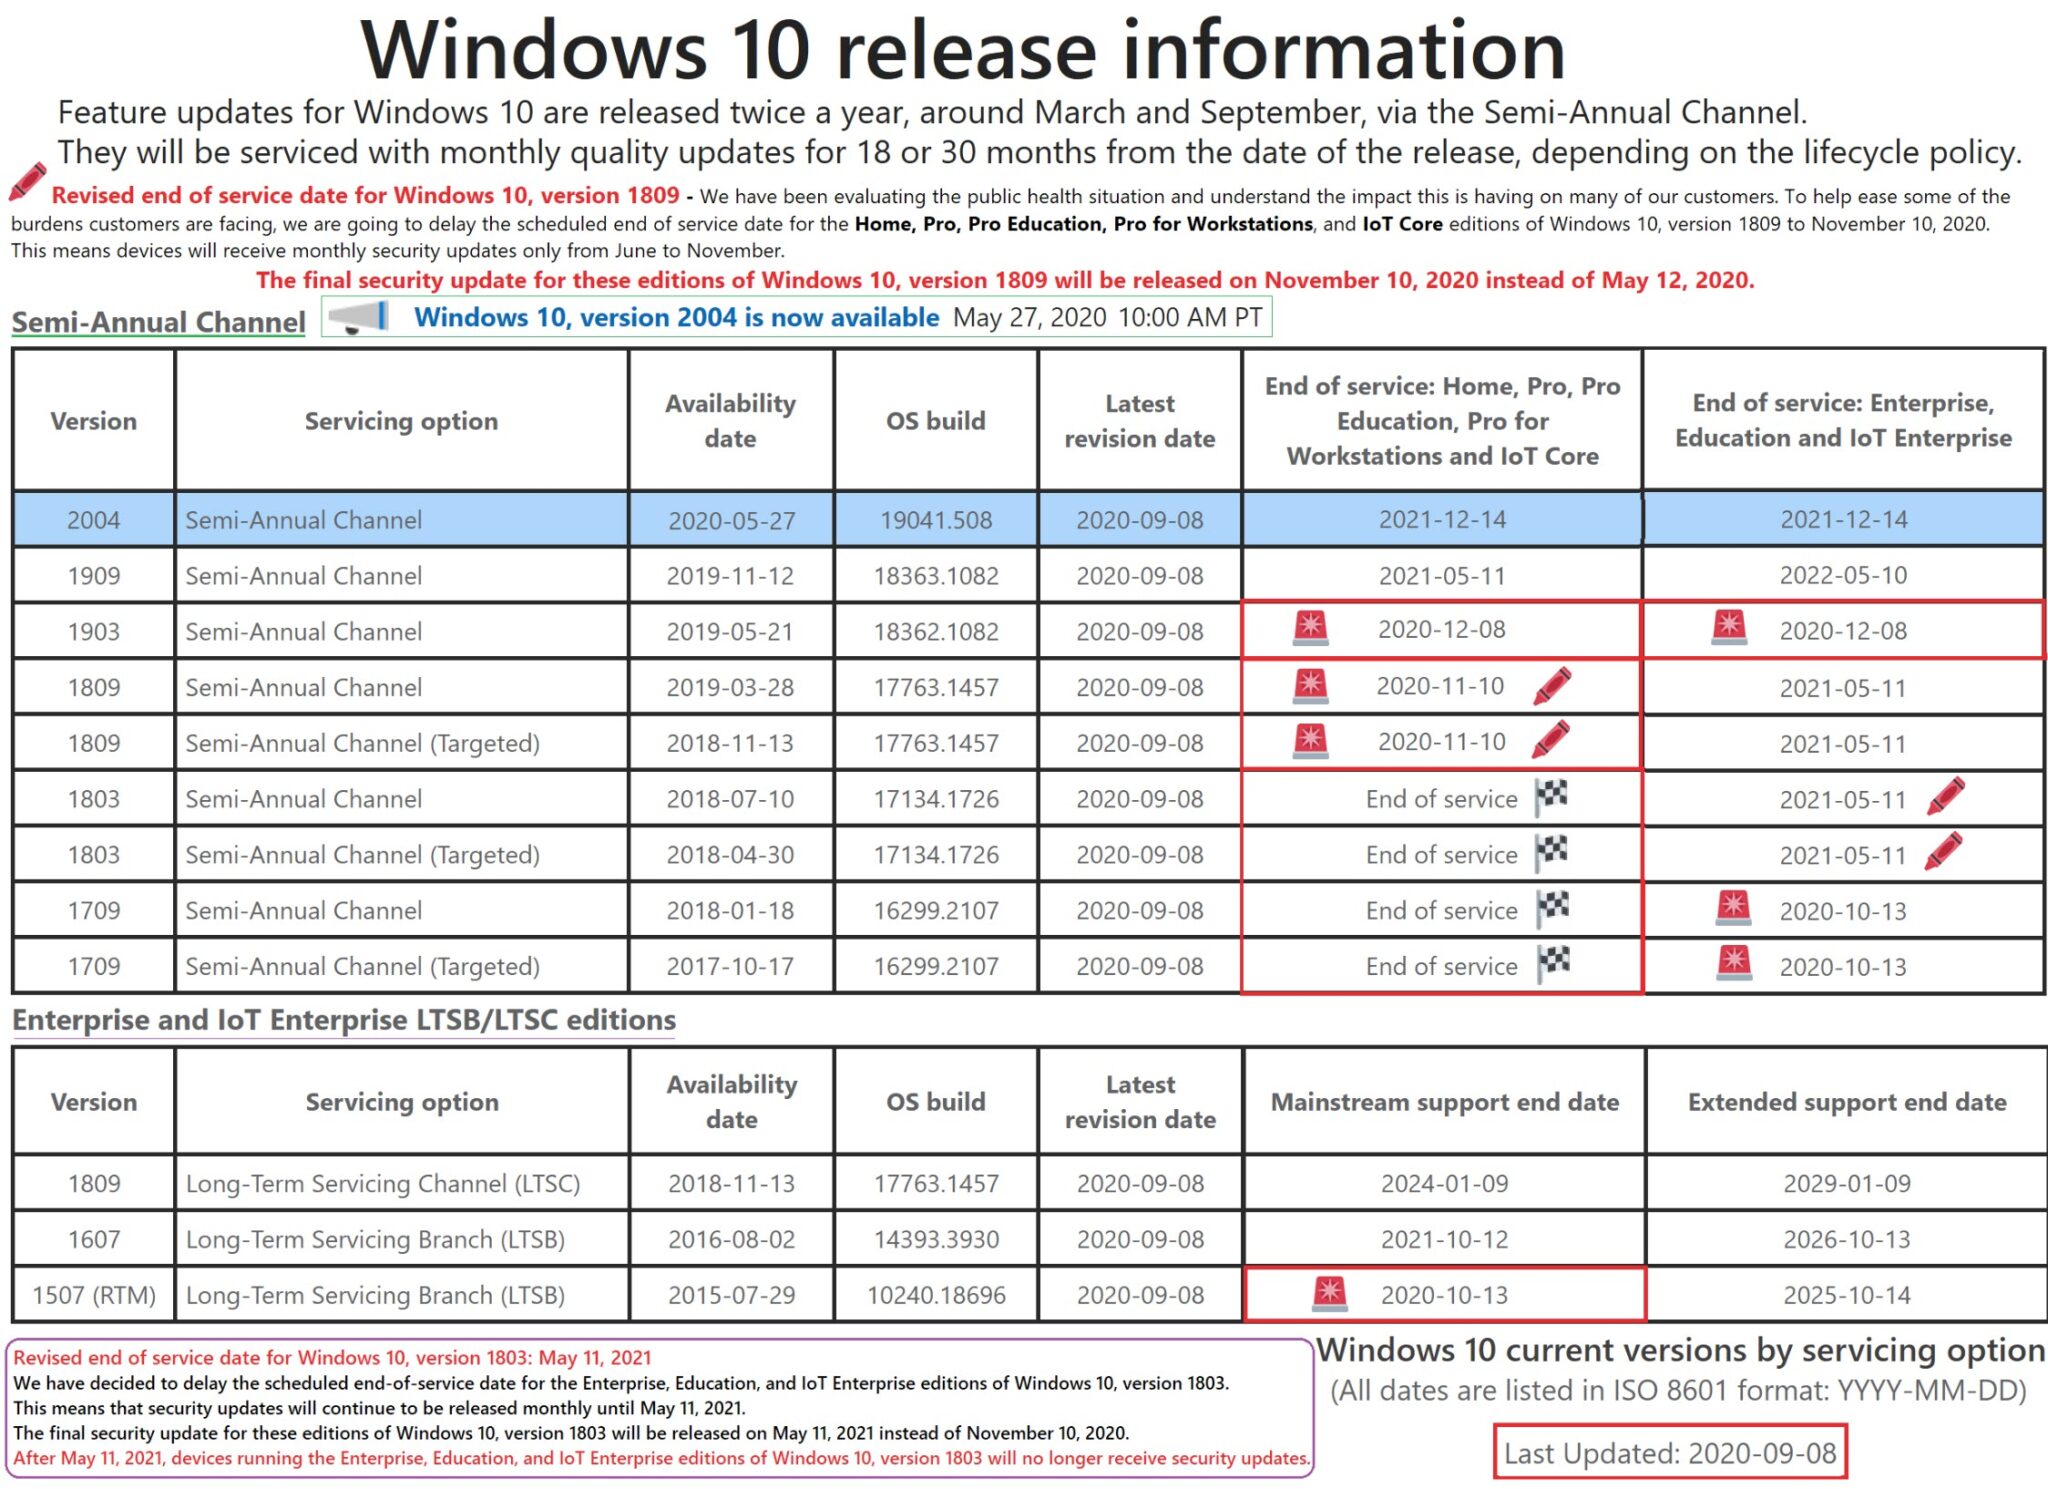 Windows 10 Release information scaled